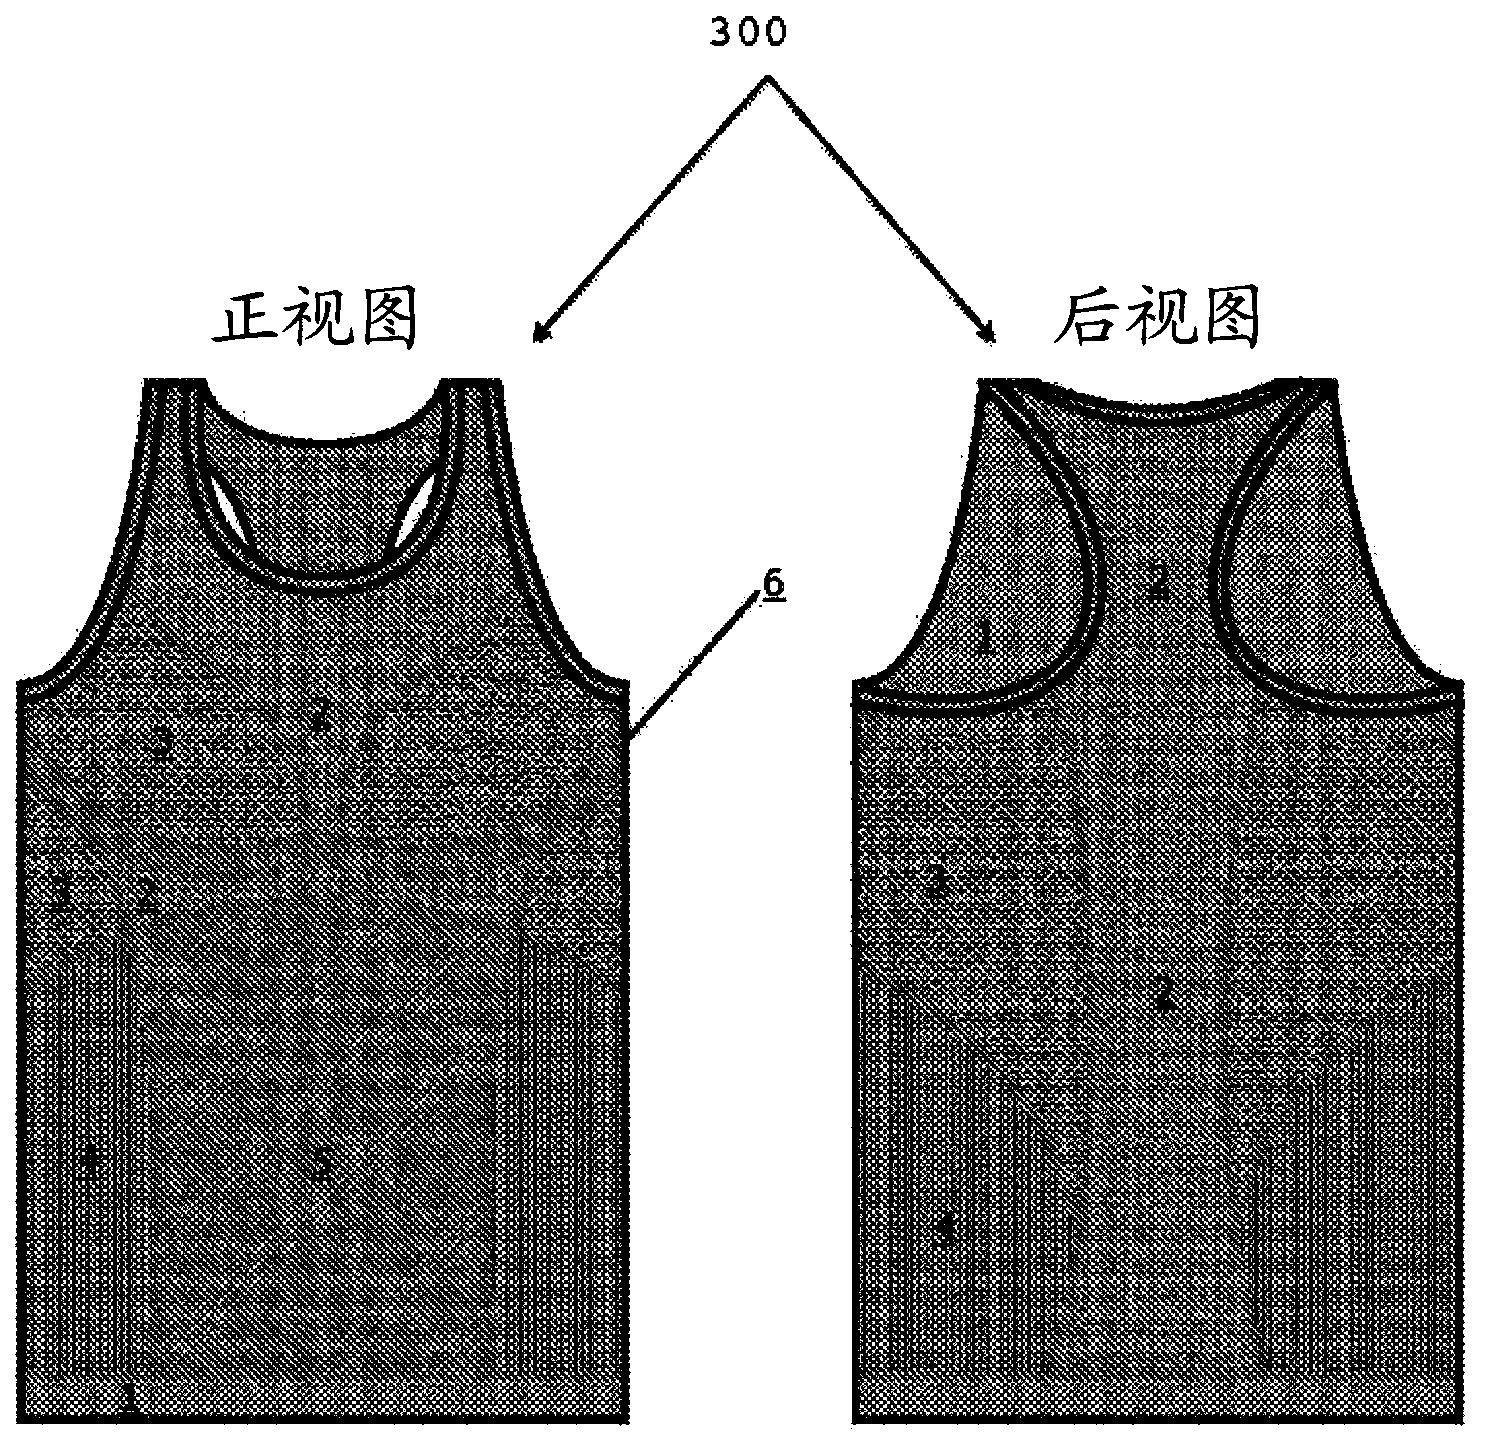 Systems and methods of shape-compression apparel